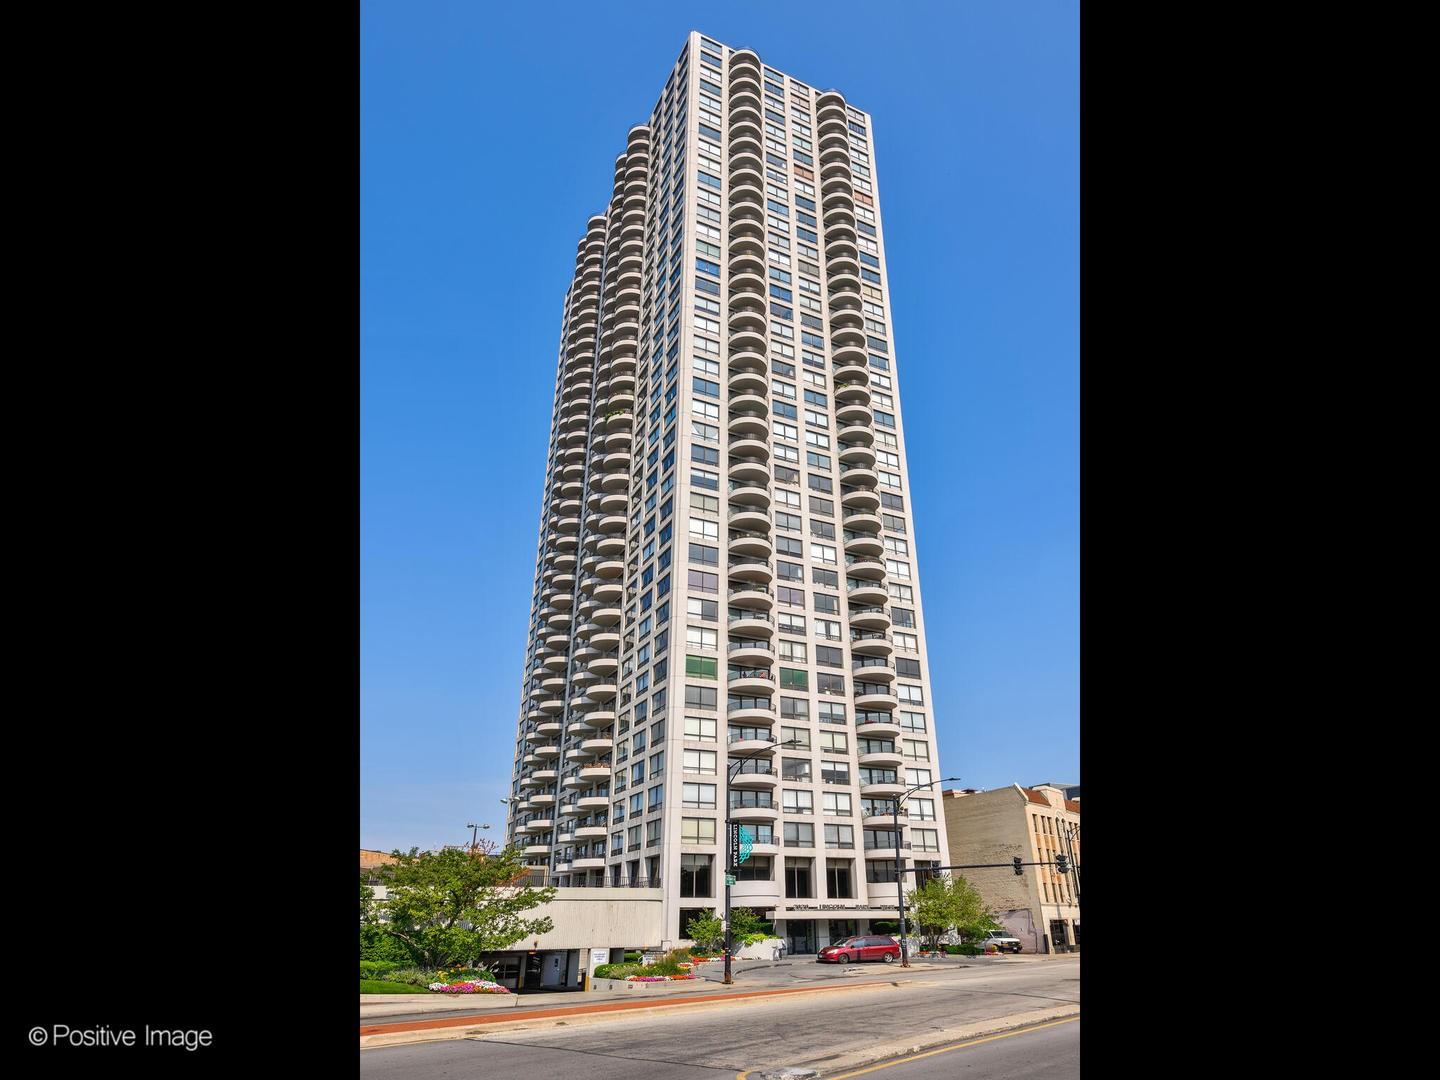 Property Image for 2020 N Lincoln Park West 5F